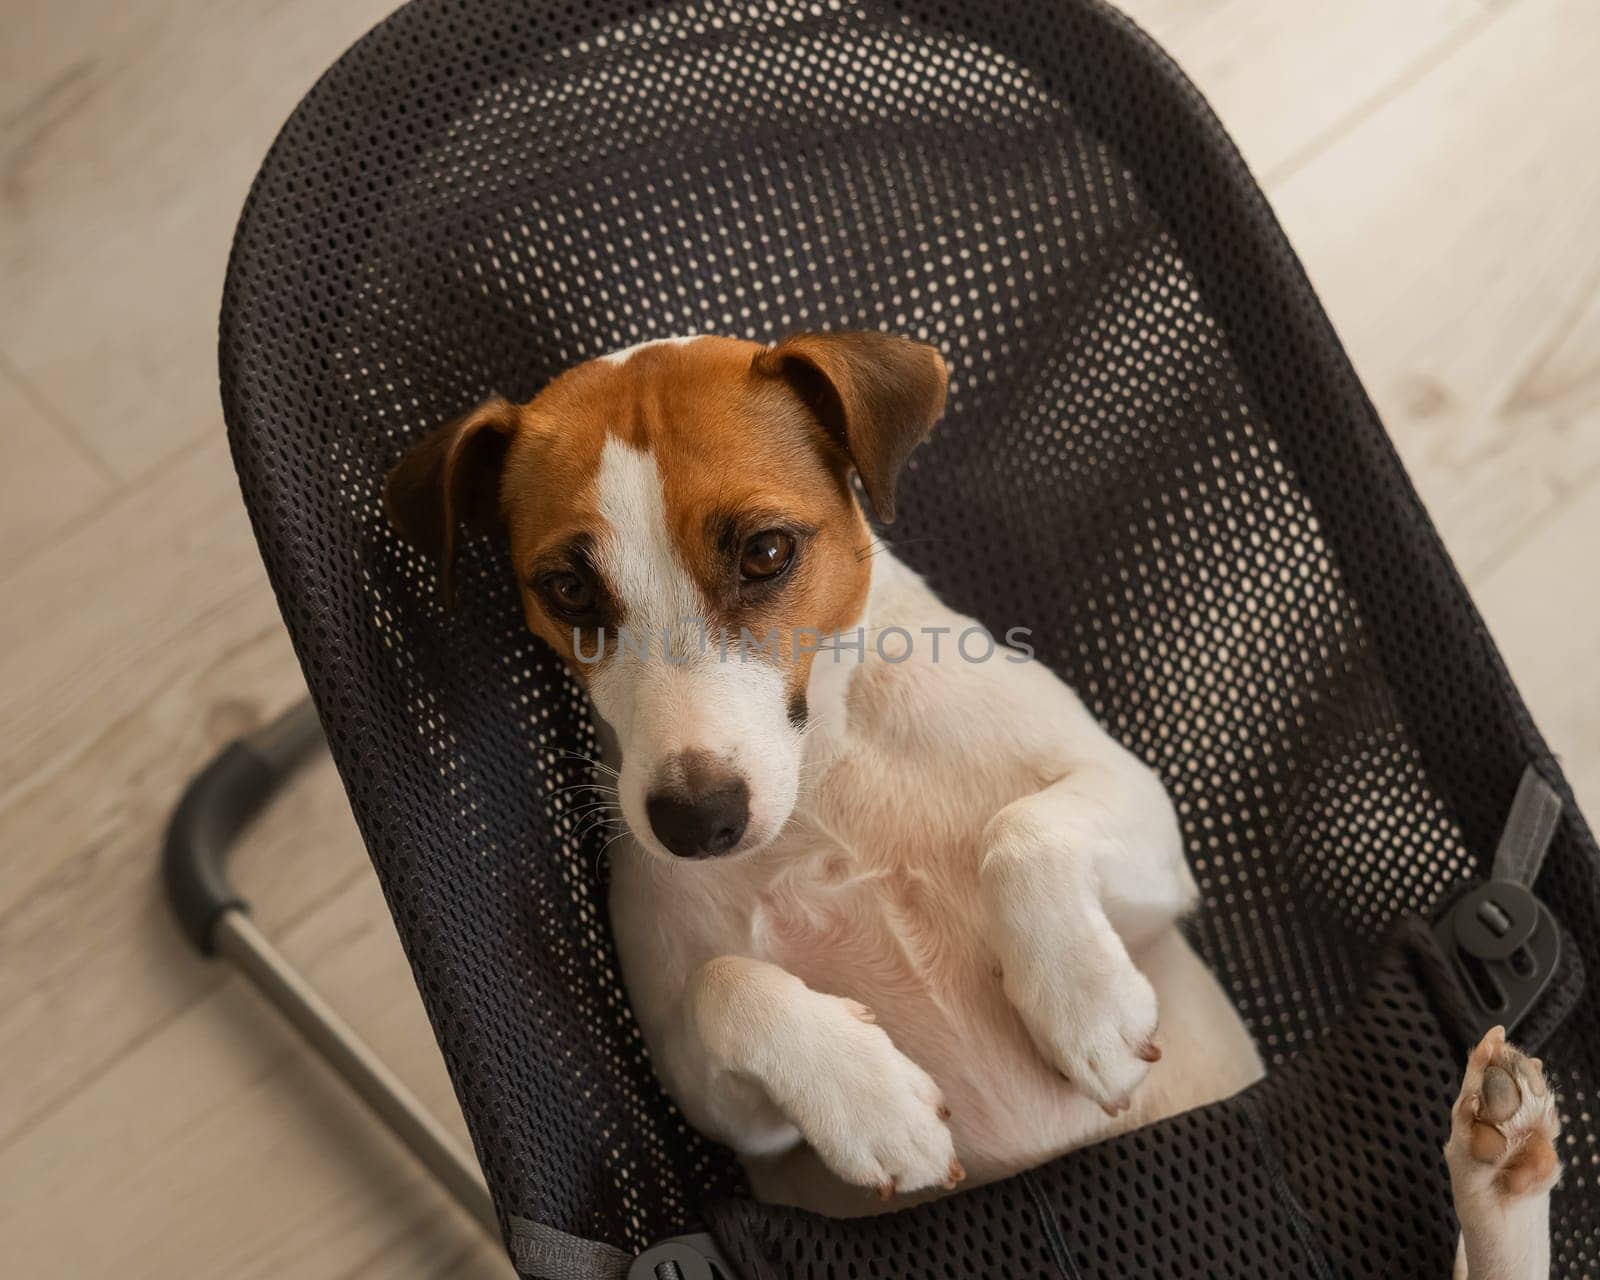 A Jack Russell Terrier dog lies in a children's lounge chair